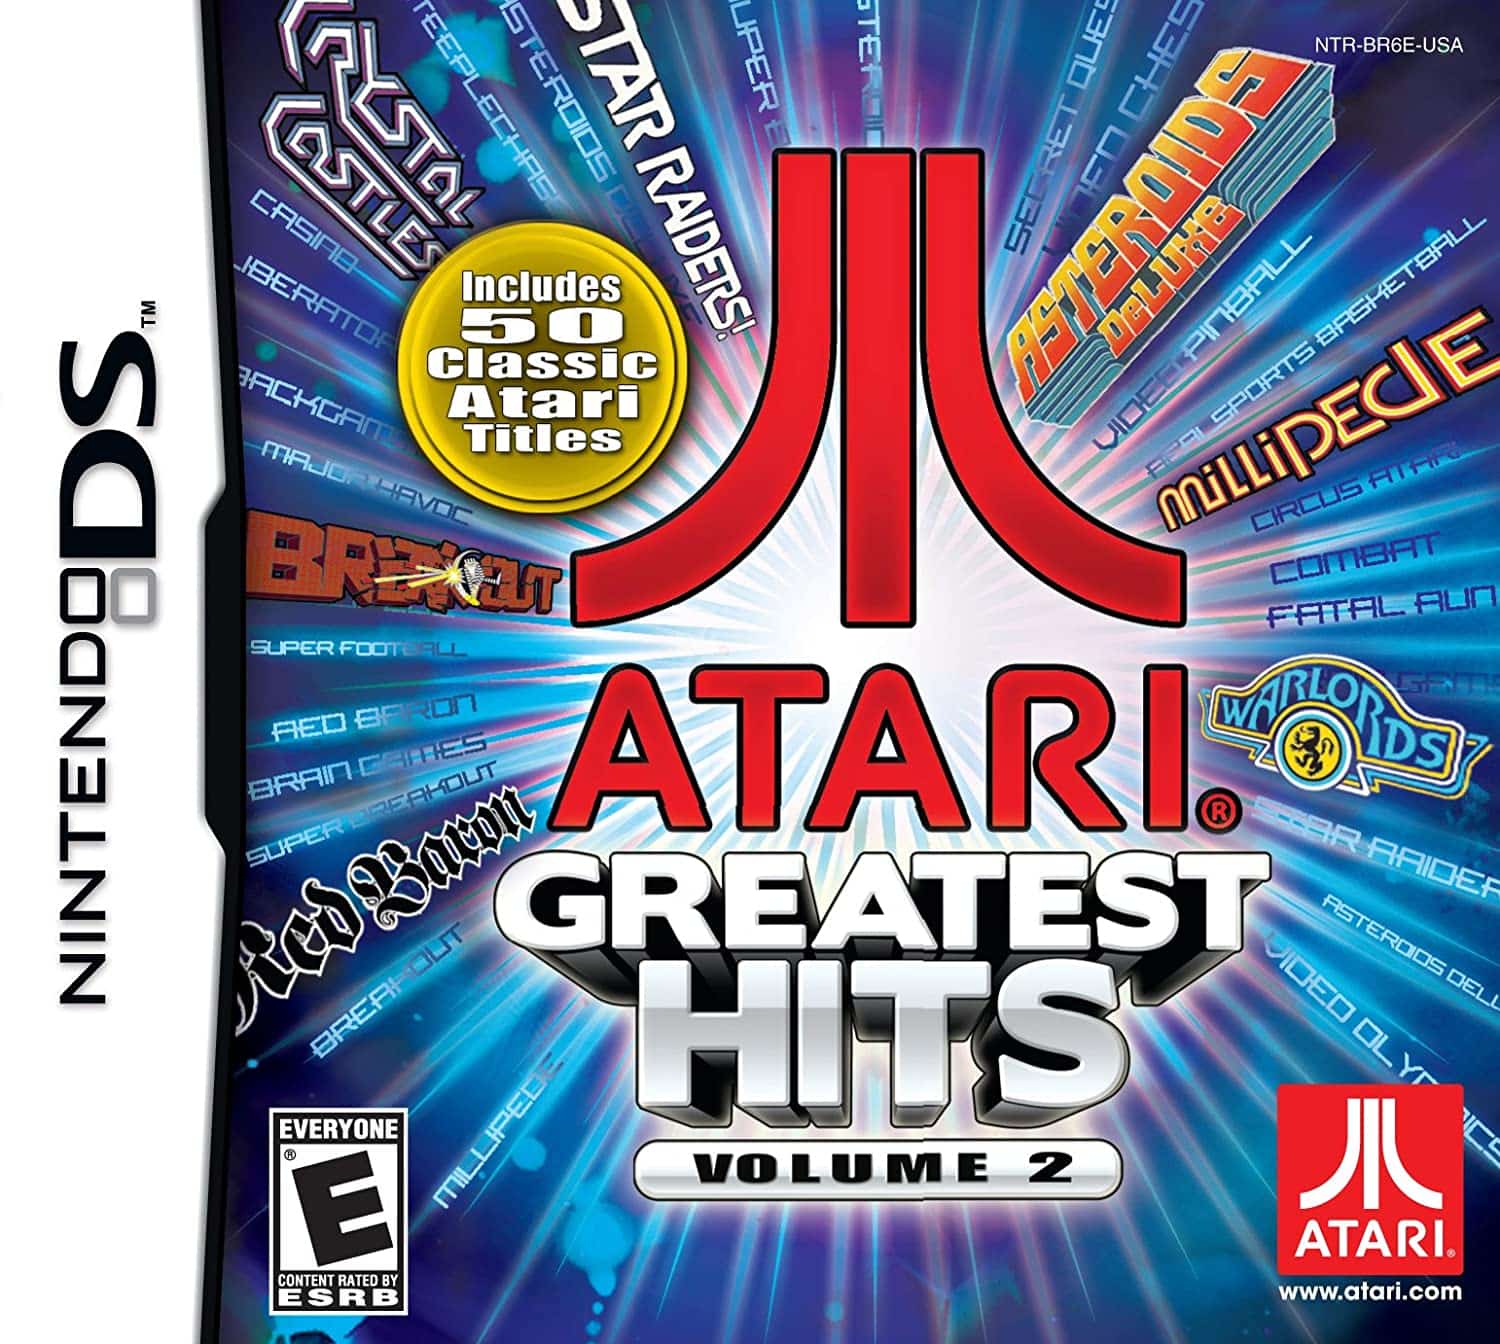 Atari Greatest Hits Volume 2 player count stats